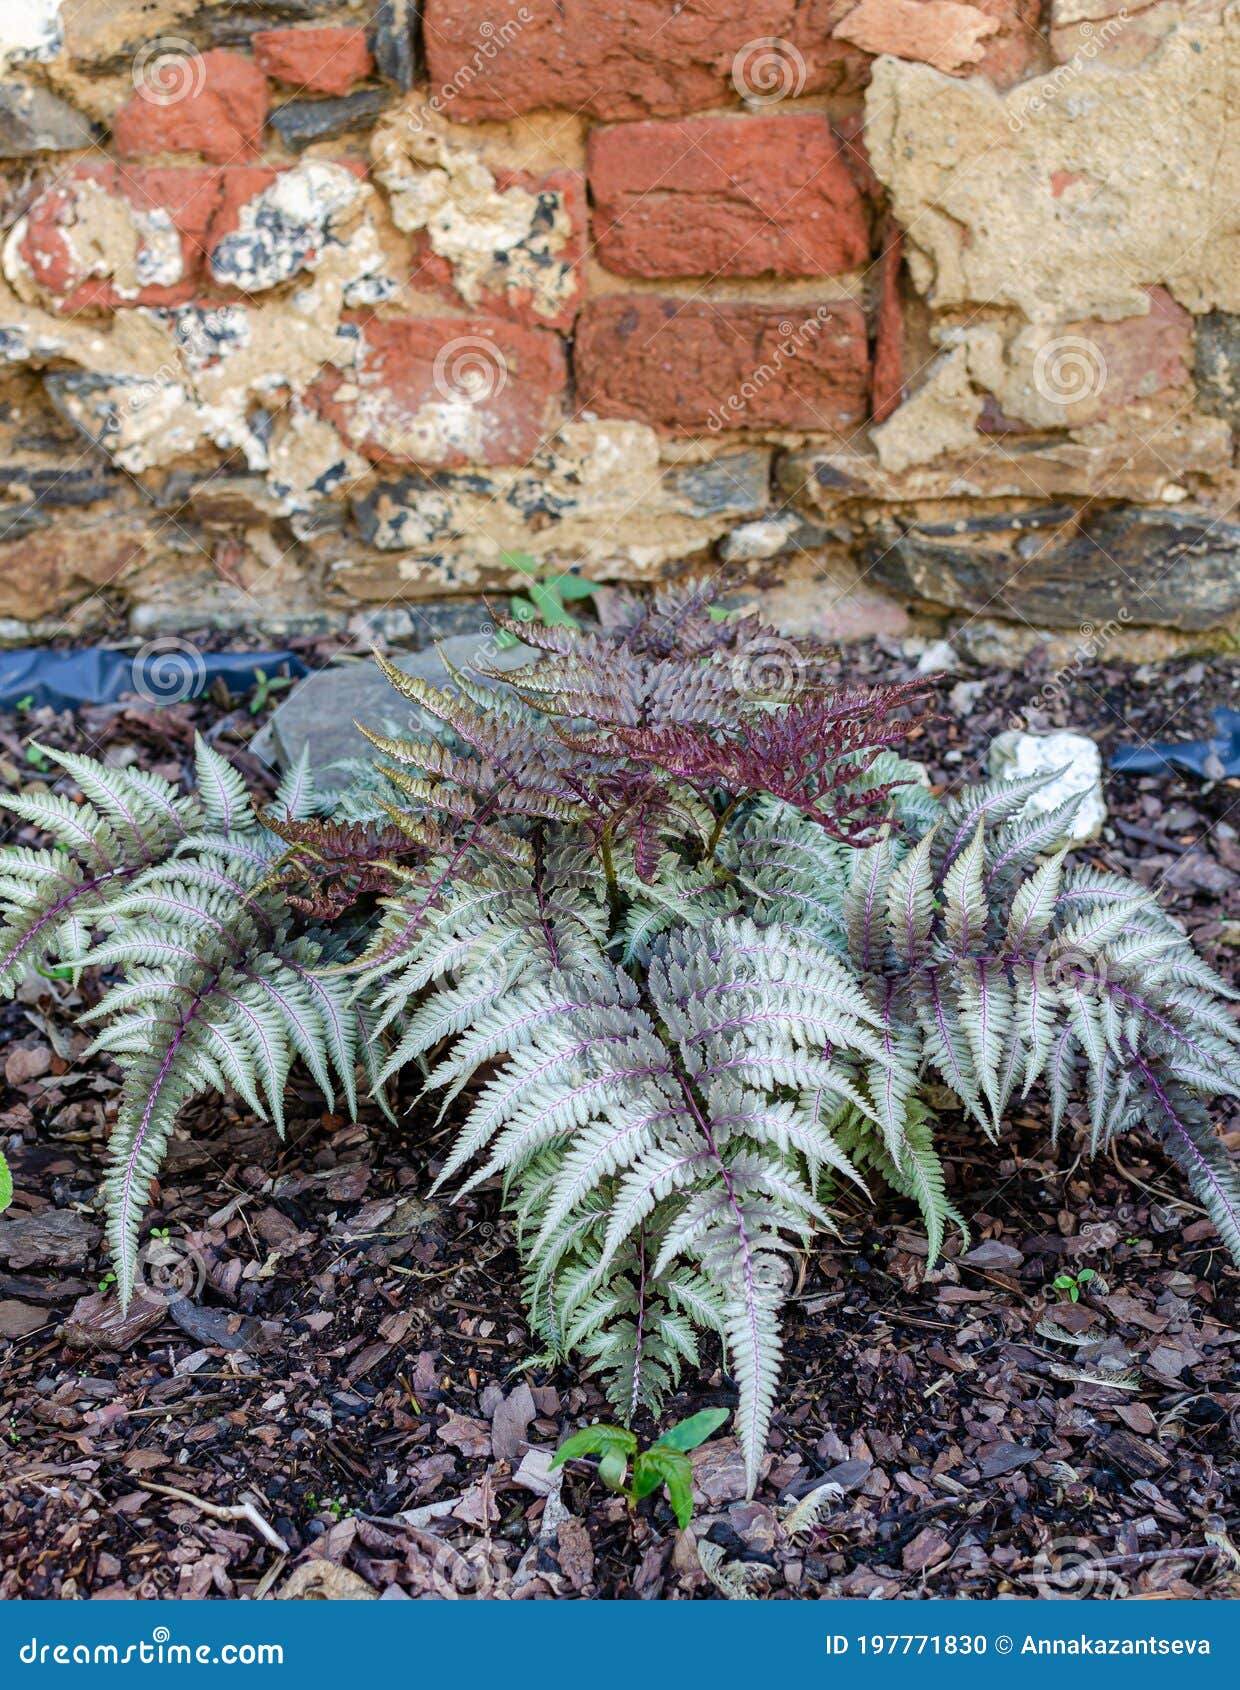 athyrium niponicum var. pictum, commonly known as japanese painted fern